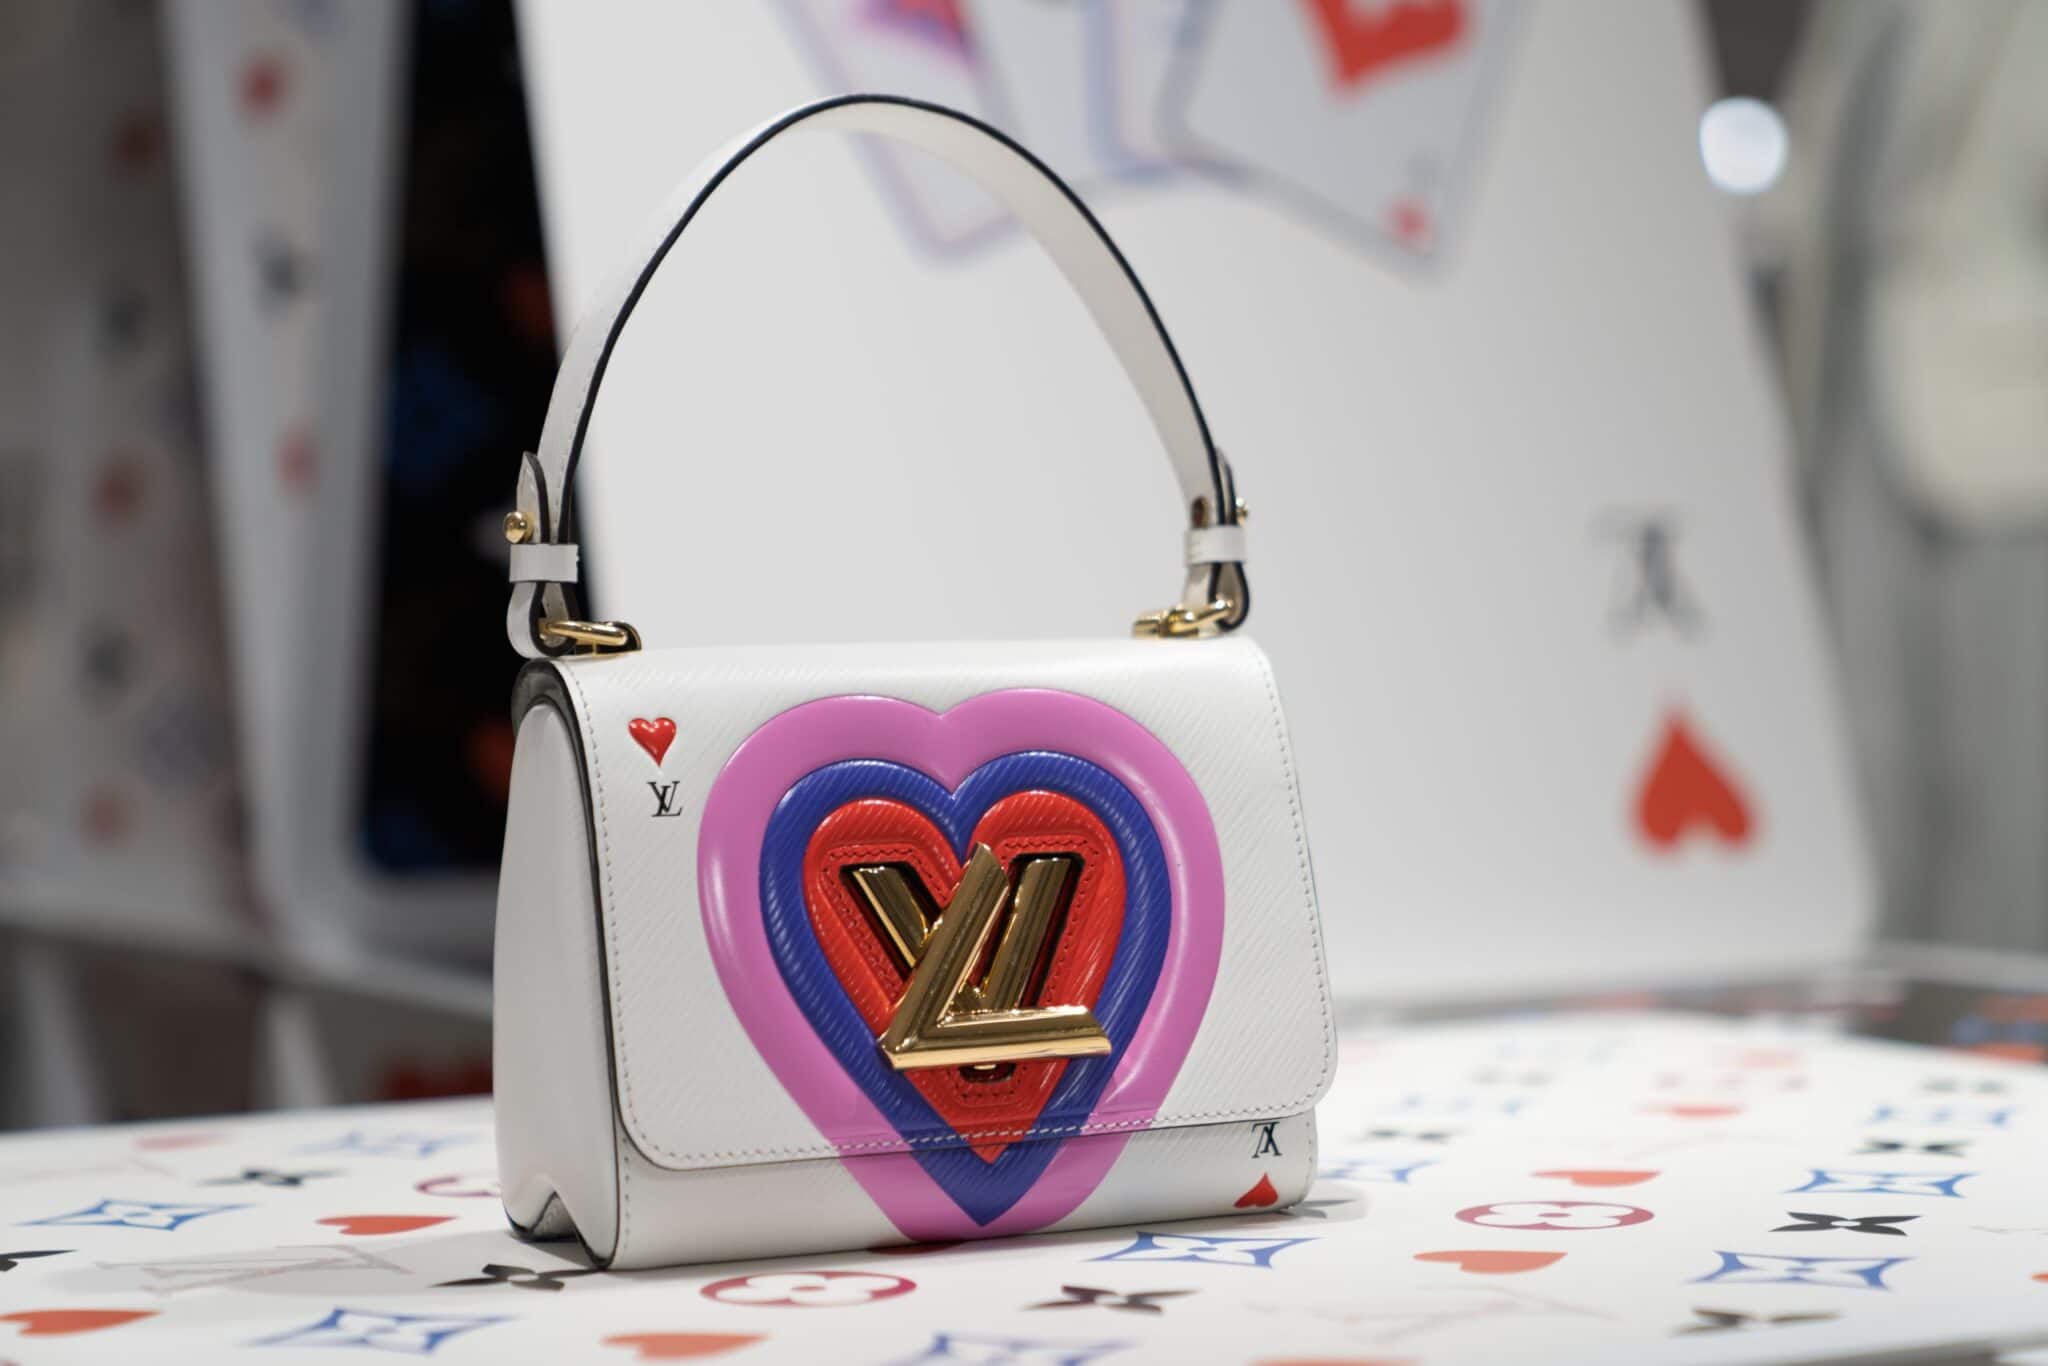 Louis Vuitton Cruise 2021 Collection - Game On | Spotted Fashion